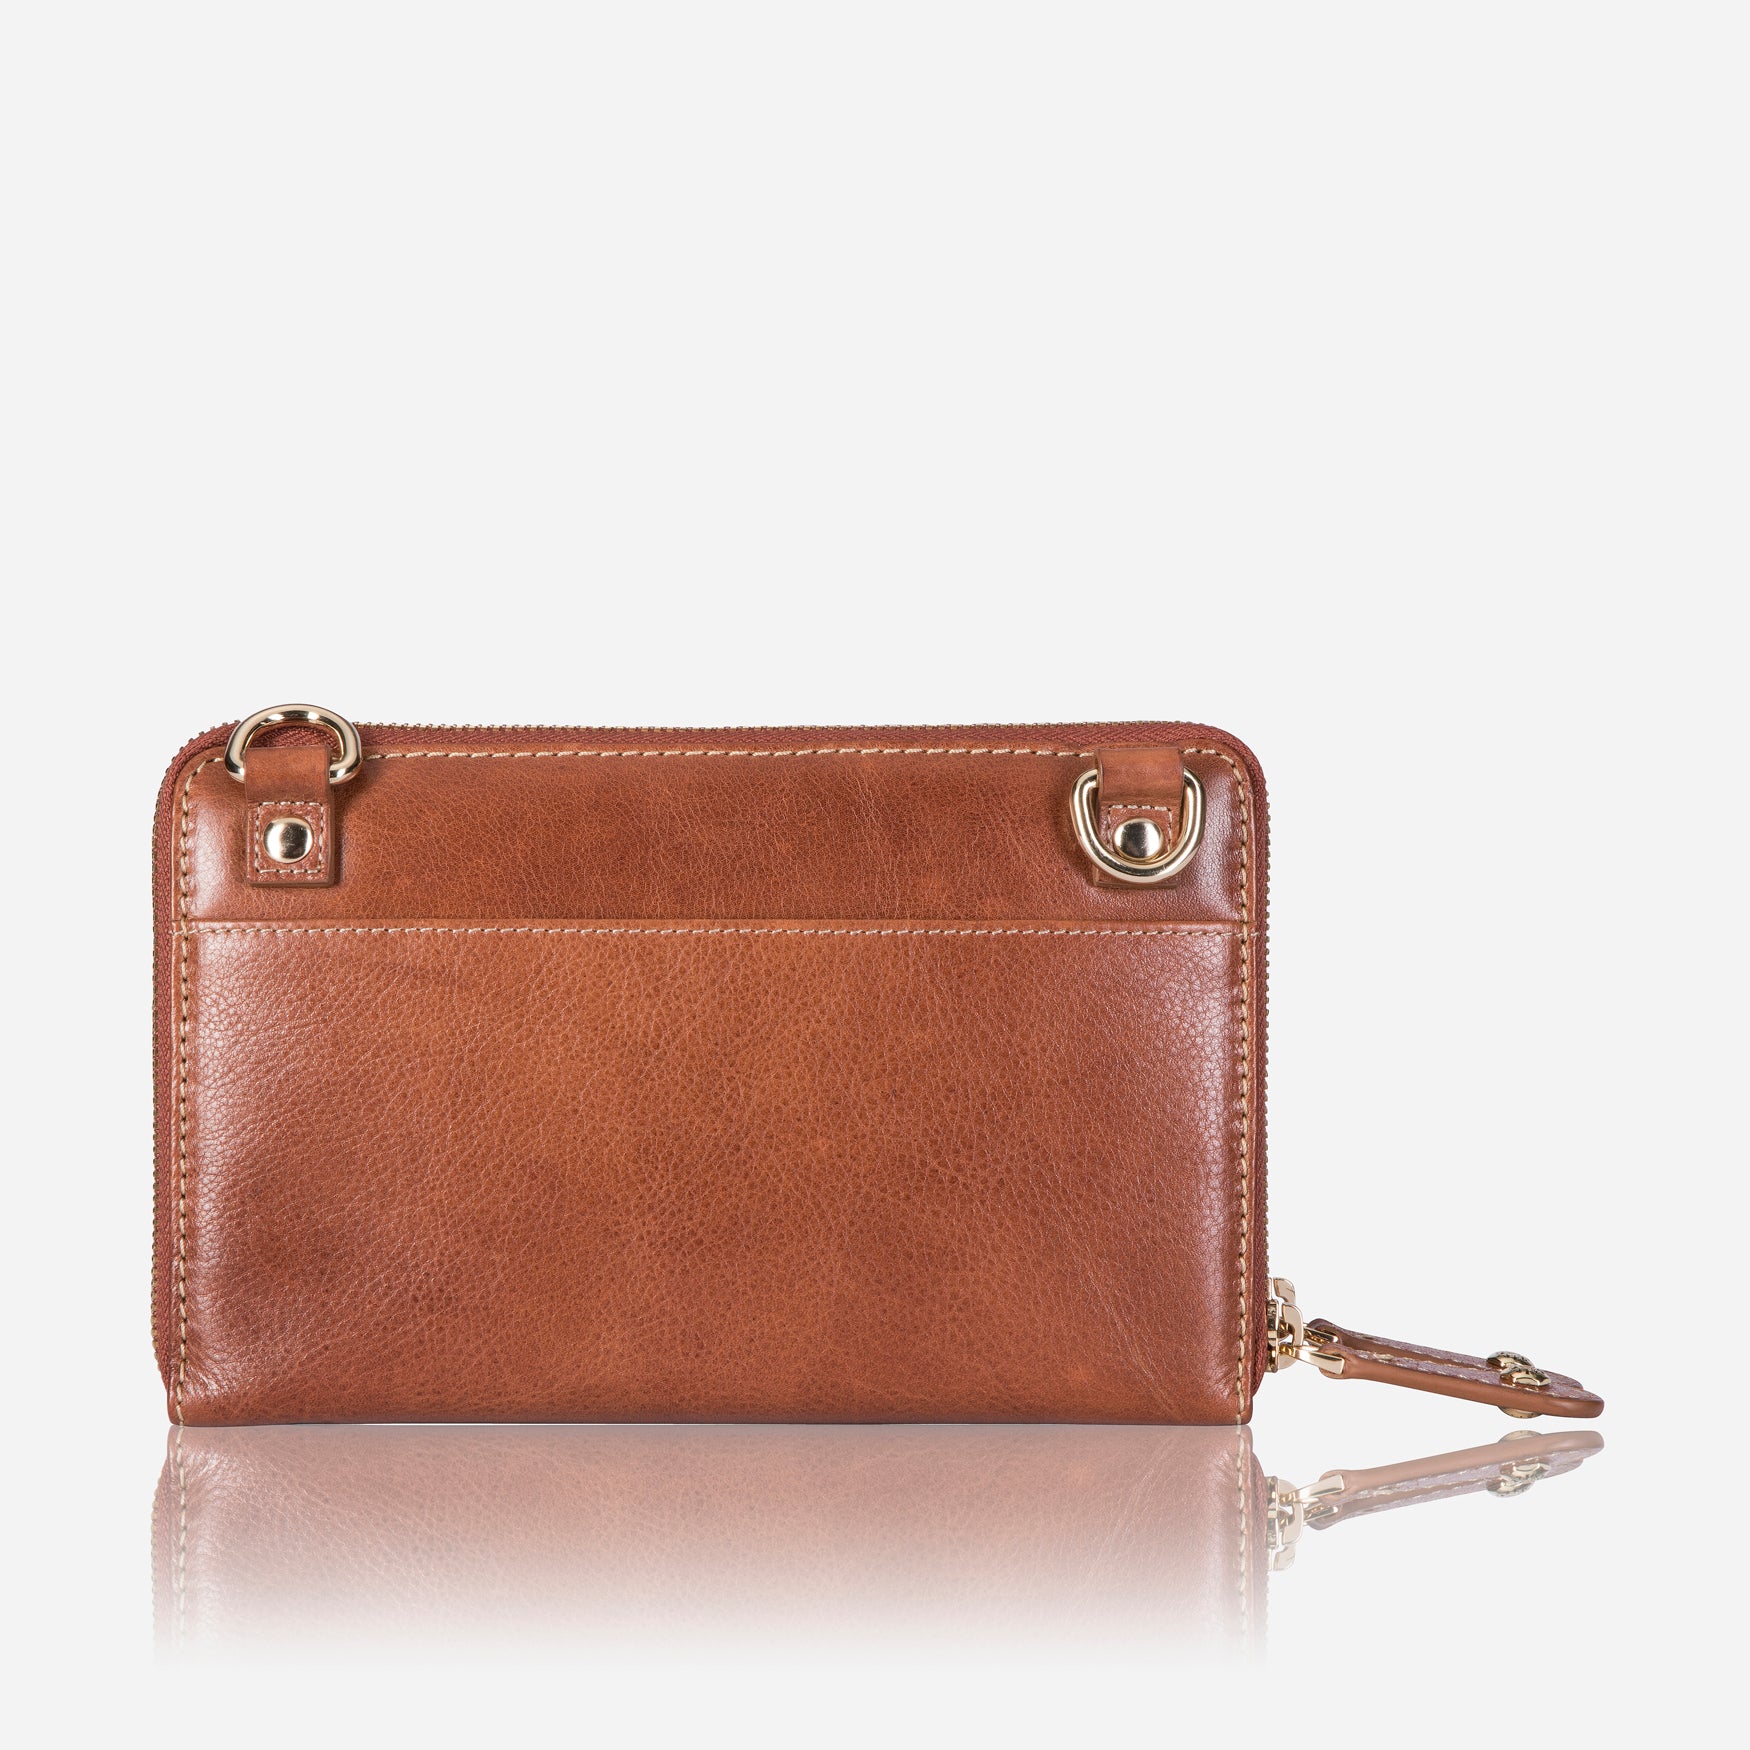 Ladies Large Leather Purse With Detachable Strap, Tan - Jekyll and Hide SA